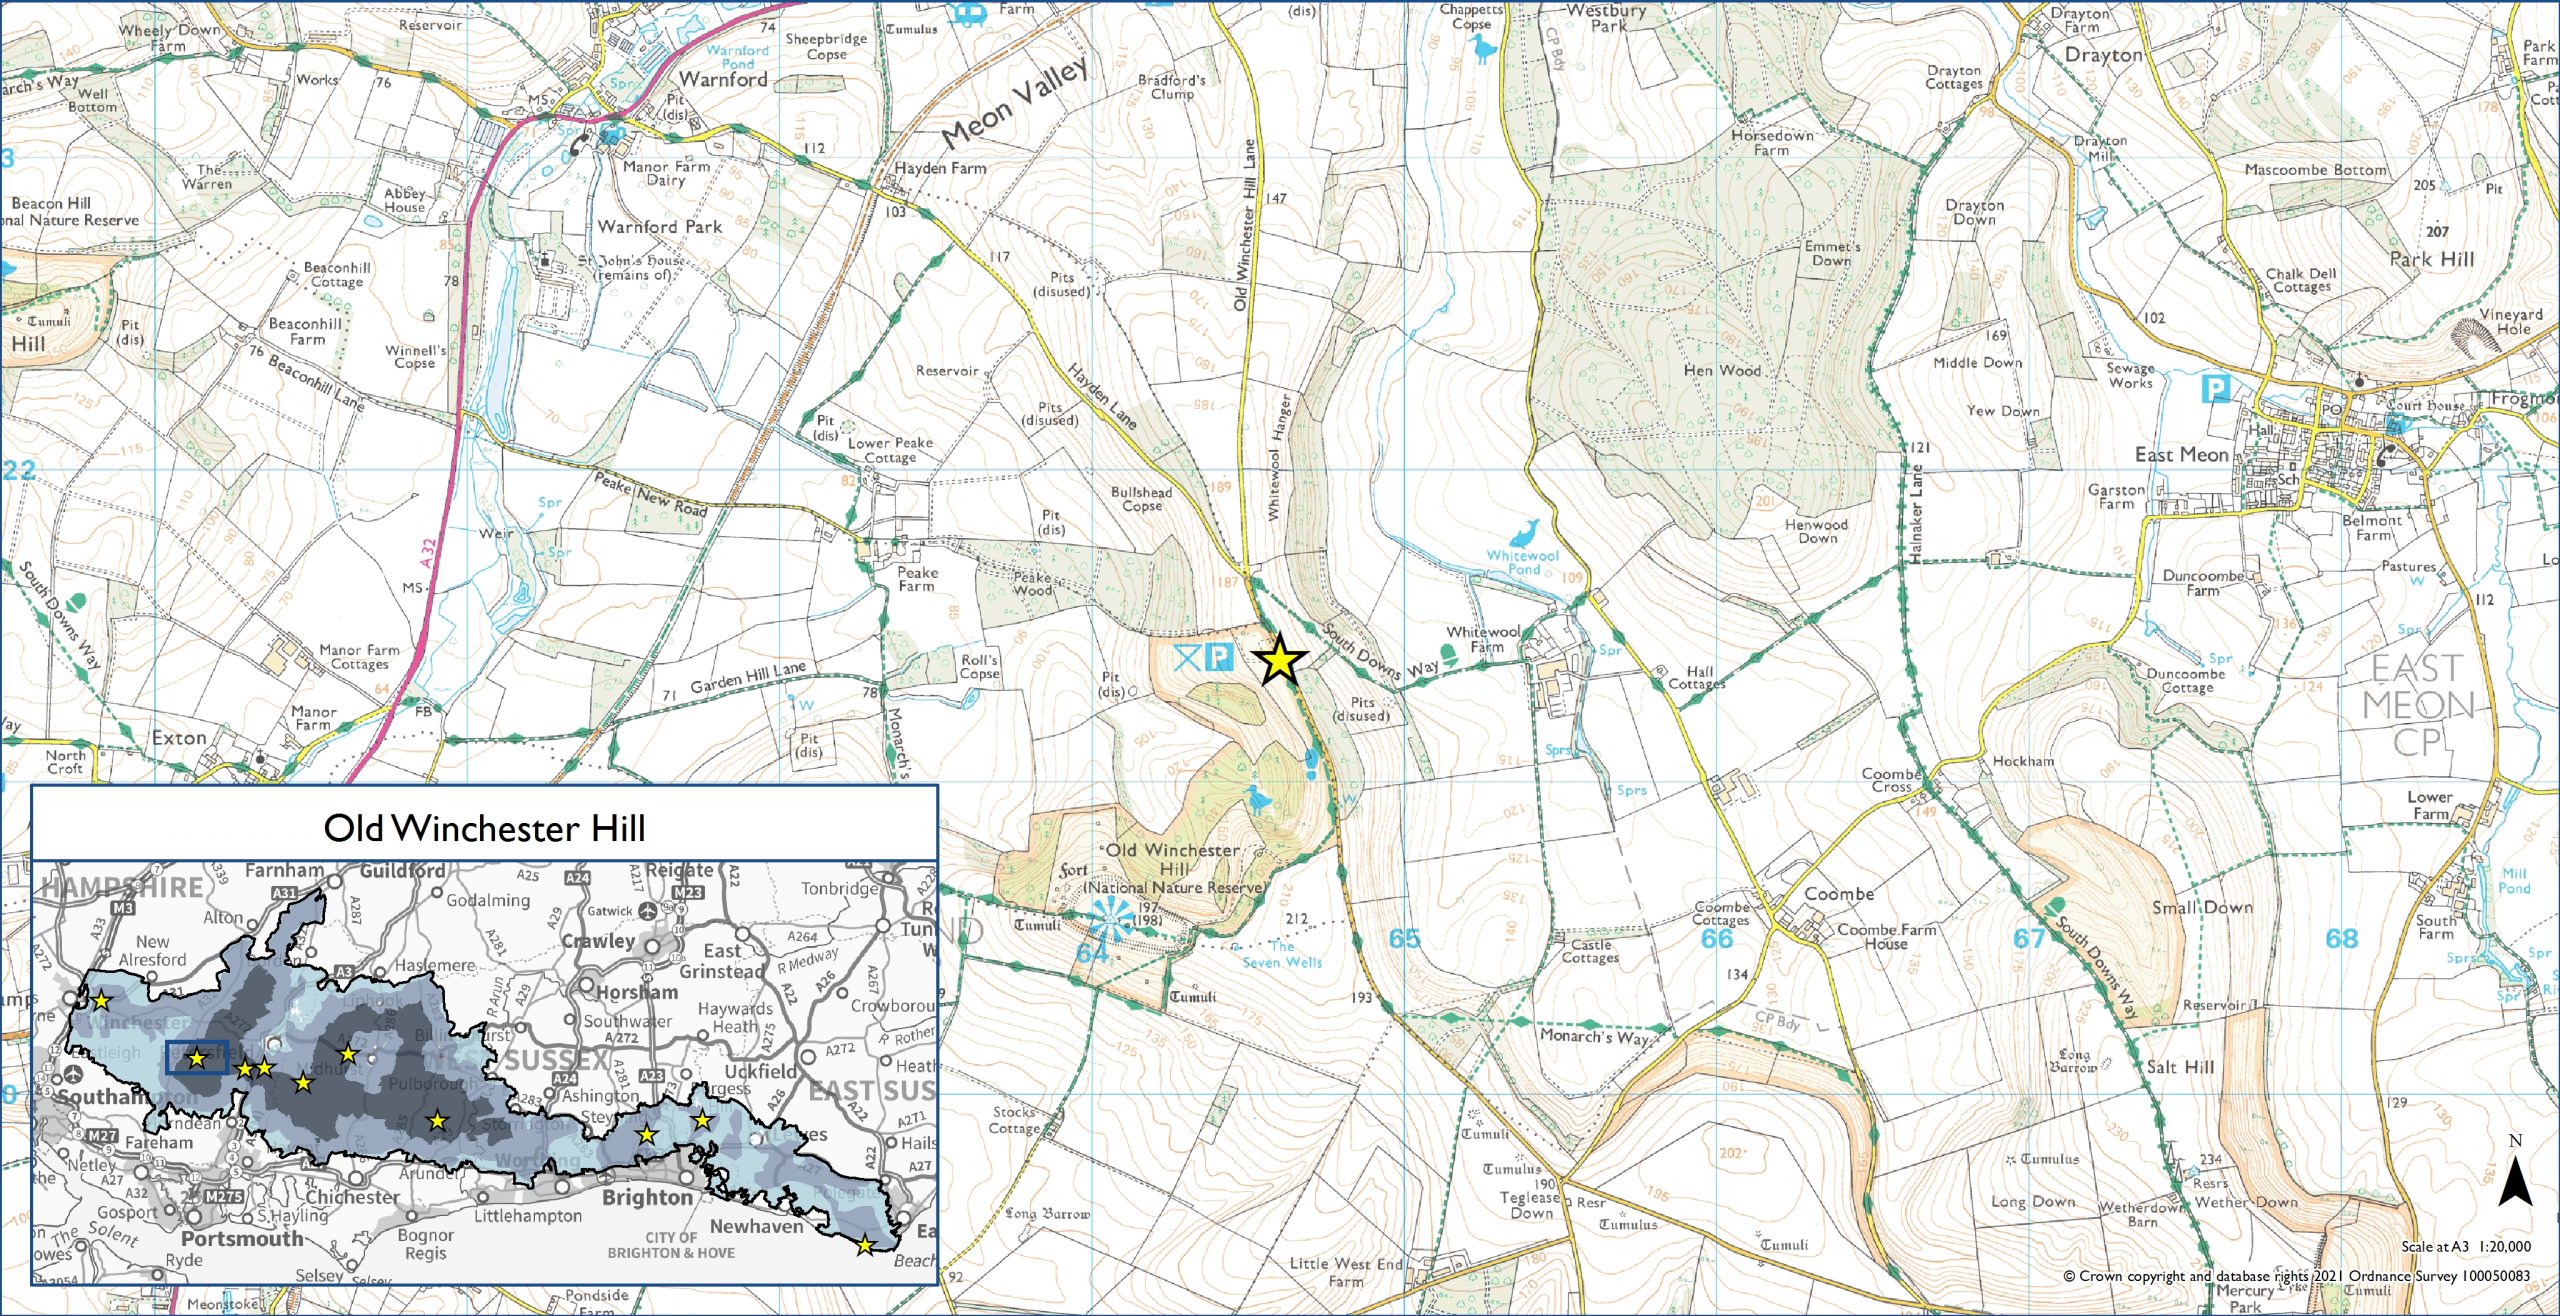 OS map showing location of Old Winchester Hill Dark Sky Discovery site